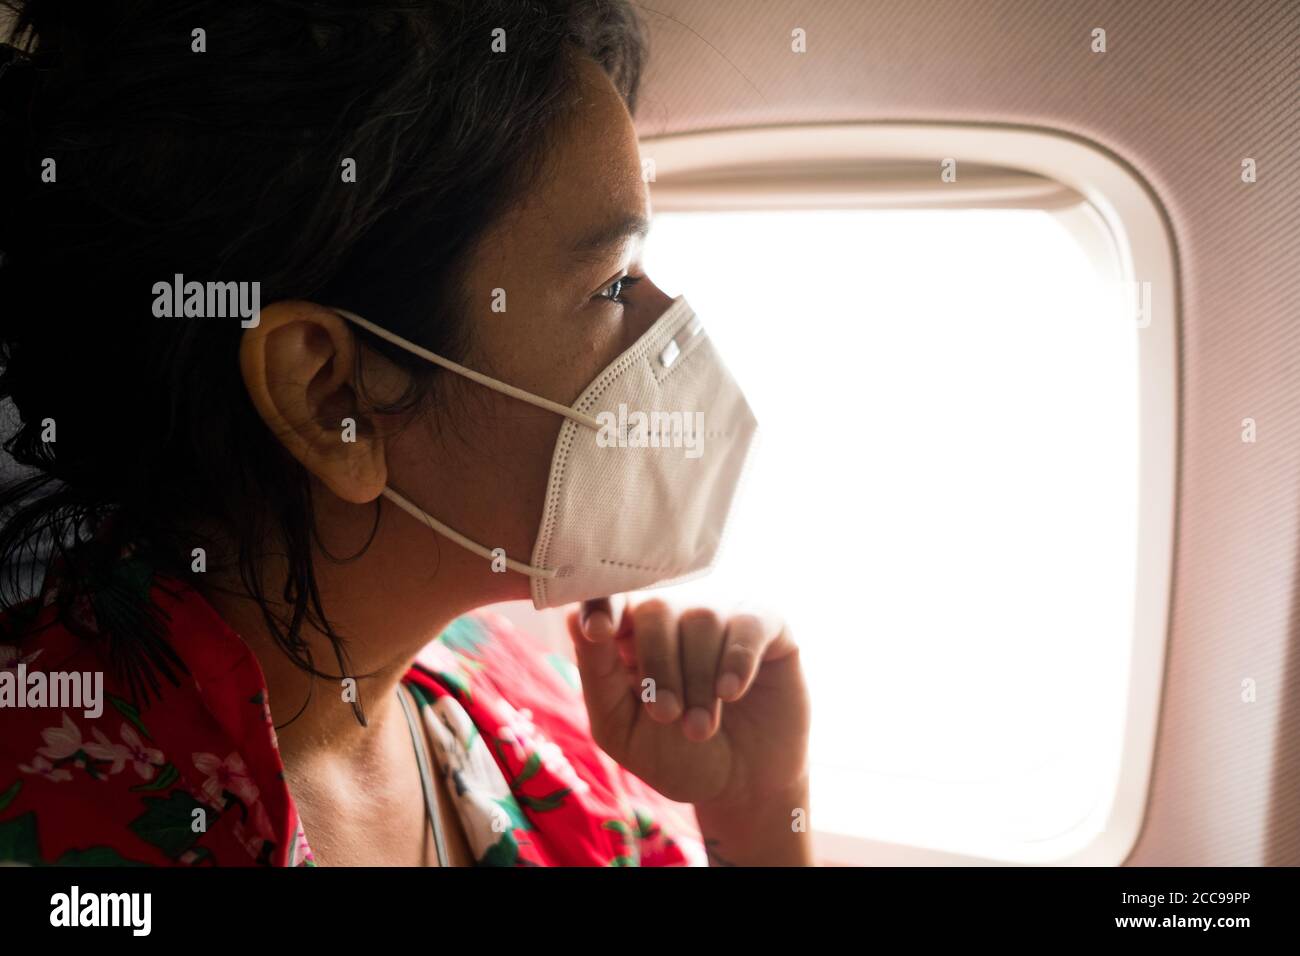 worried young woman inside plane wearing protective face mask, going on vacation and traveling during the coronavirus pandemic, which has caused a cri Stock Photo